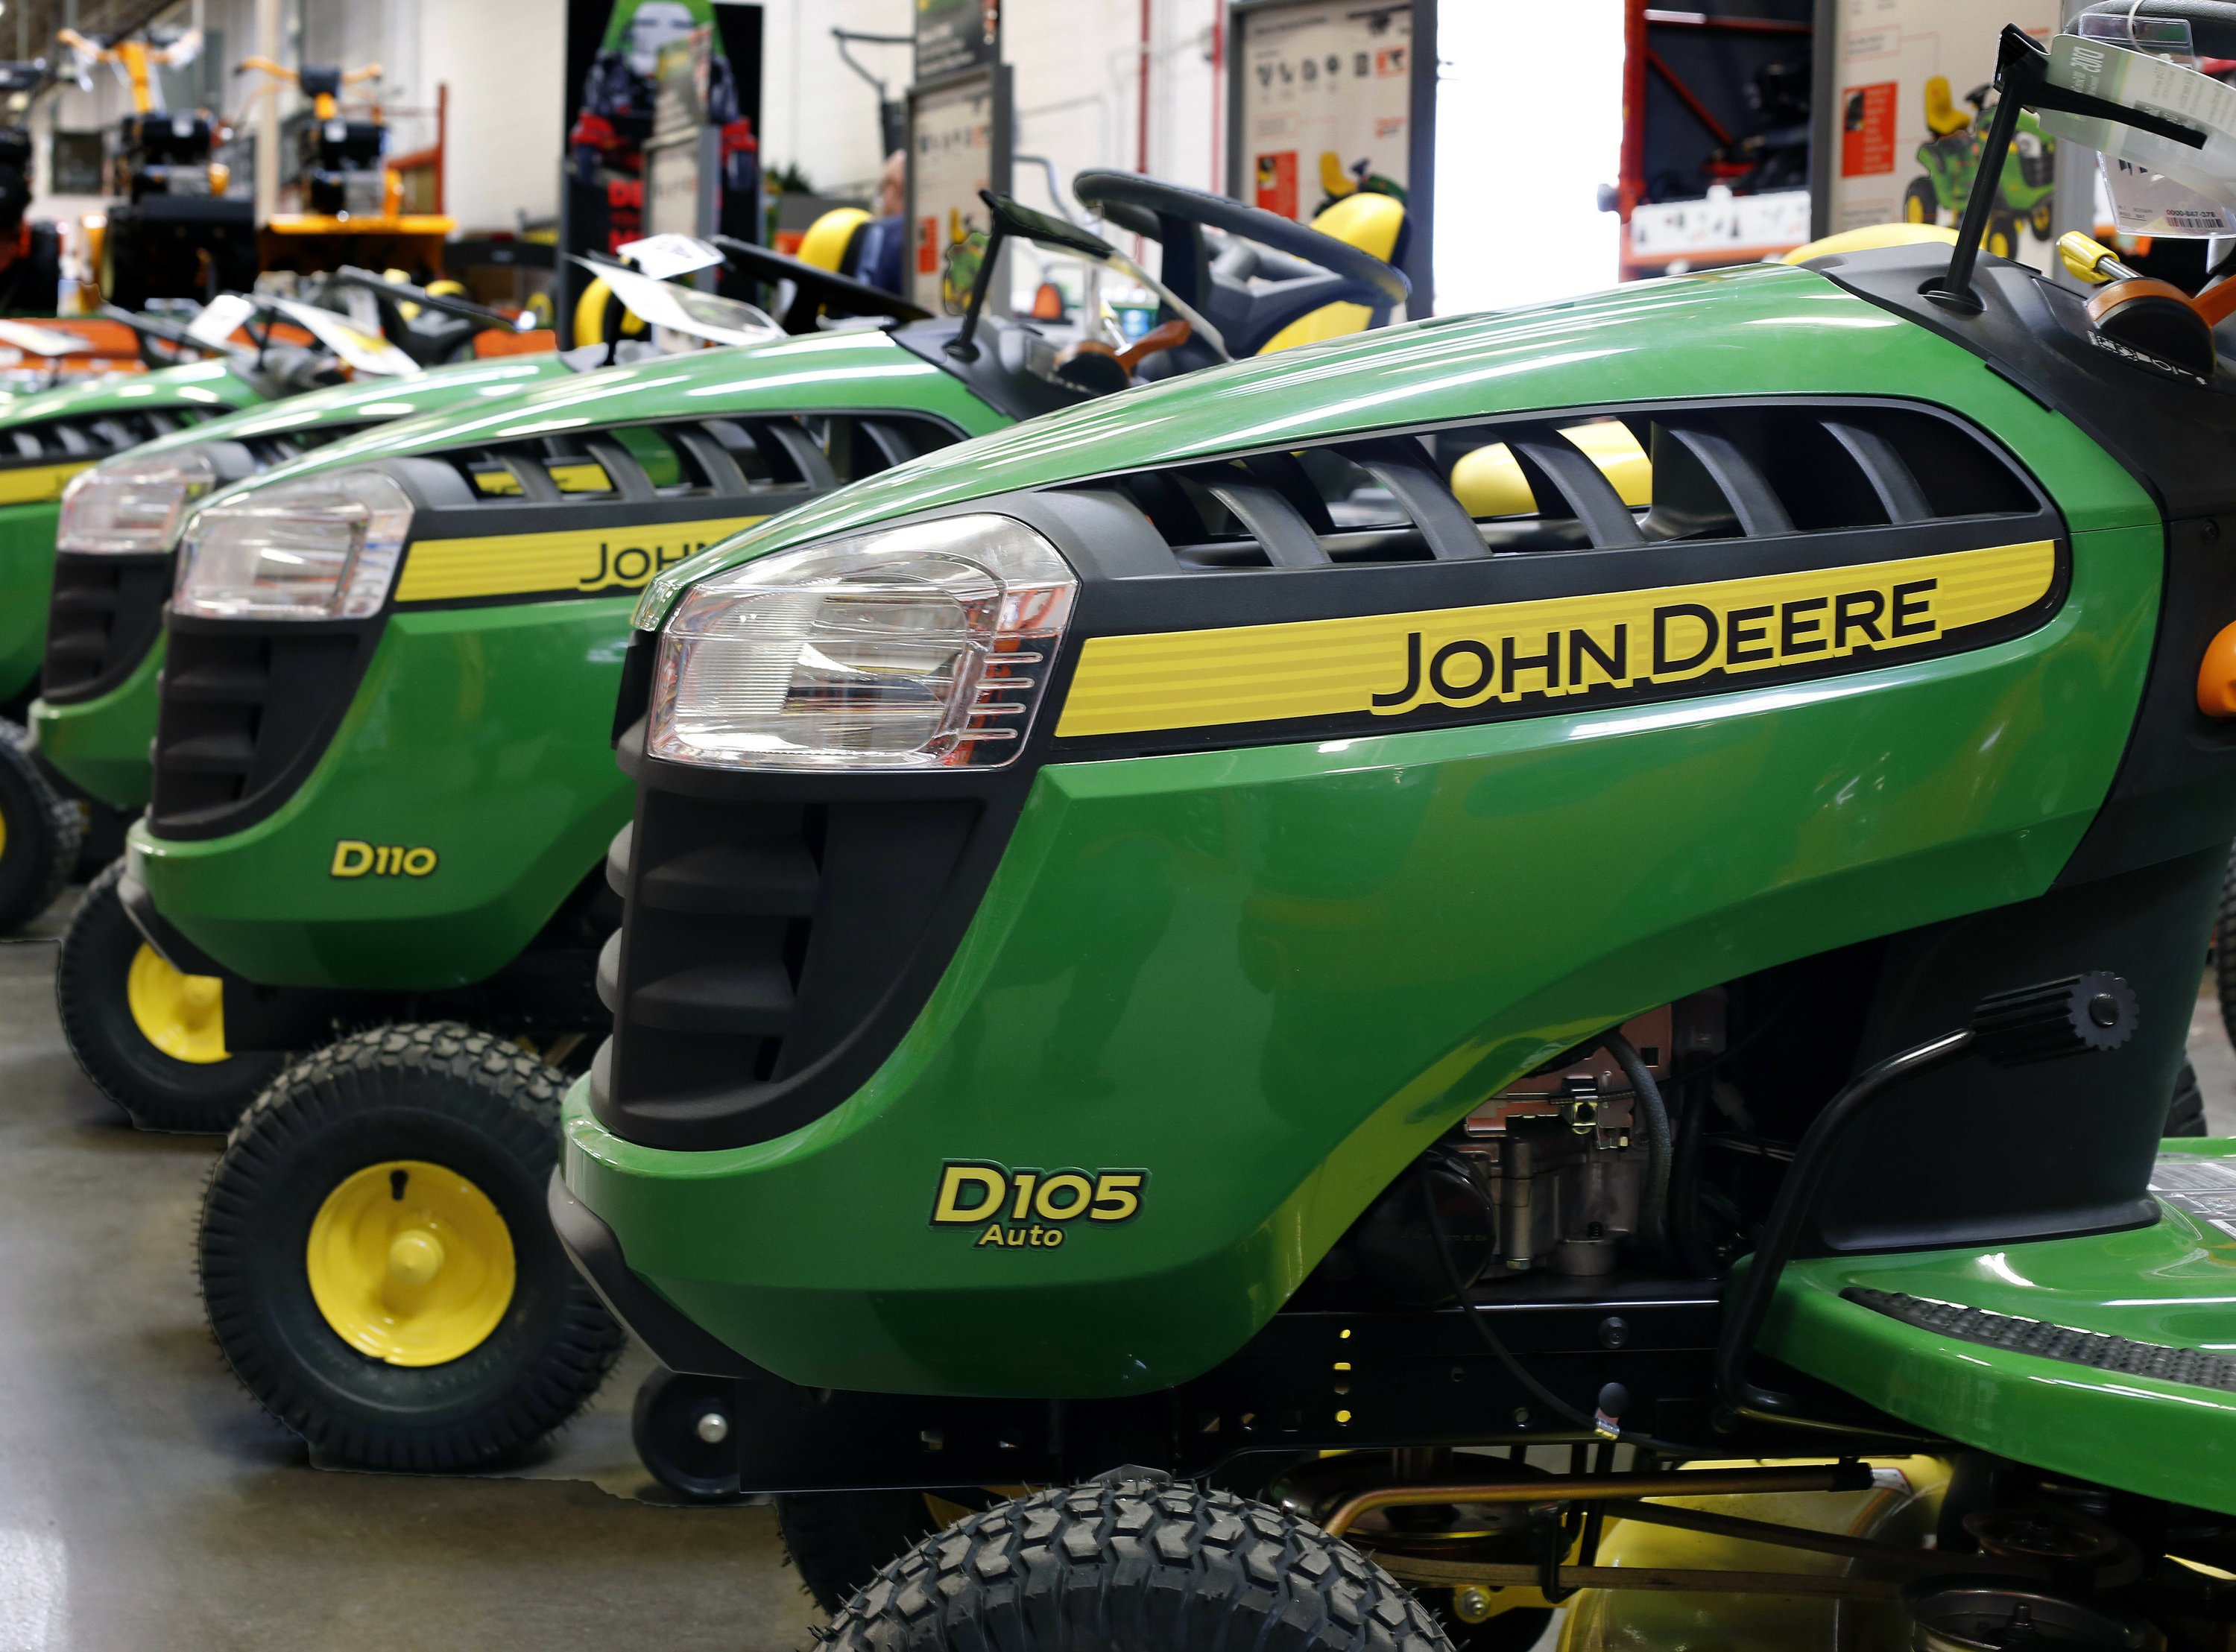 FILE - In this March 23, 2015, file photo, John Deere lawn tractors are on display at a Home Depot in Robinson Township, Pa. Wall Street is flooding into the agricultural sector on reports that the Trump administration is preparing a plan that would send billions in aid to U.S. farmers hurt by tariffs. CF Industries Holding and Mosaic Company both traded up more than 3 percent, while Deere & Co. shot up more than 4 percent after news of the aid package was leaked to The Associated Press by two people briefed on the plan. (AP Photo/Gene J. Puskar, File)